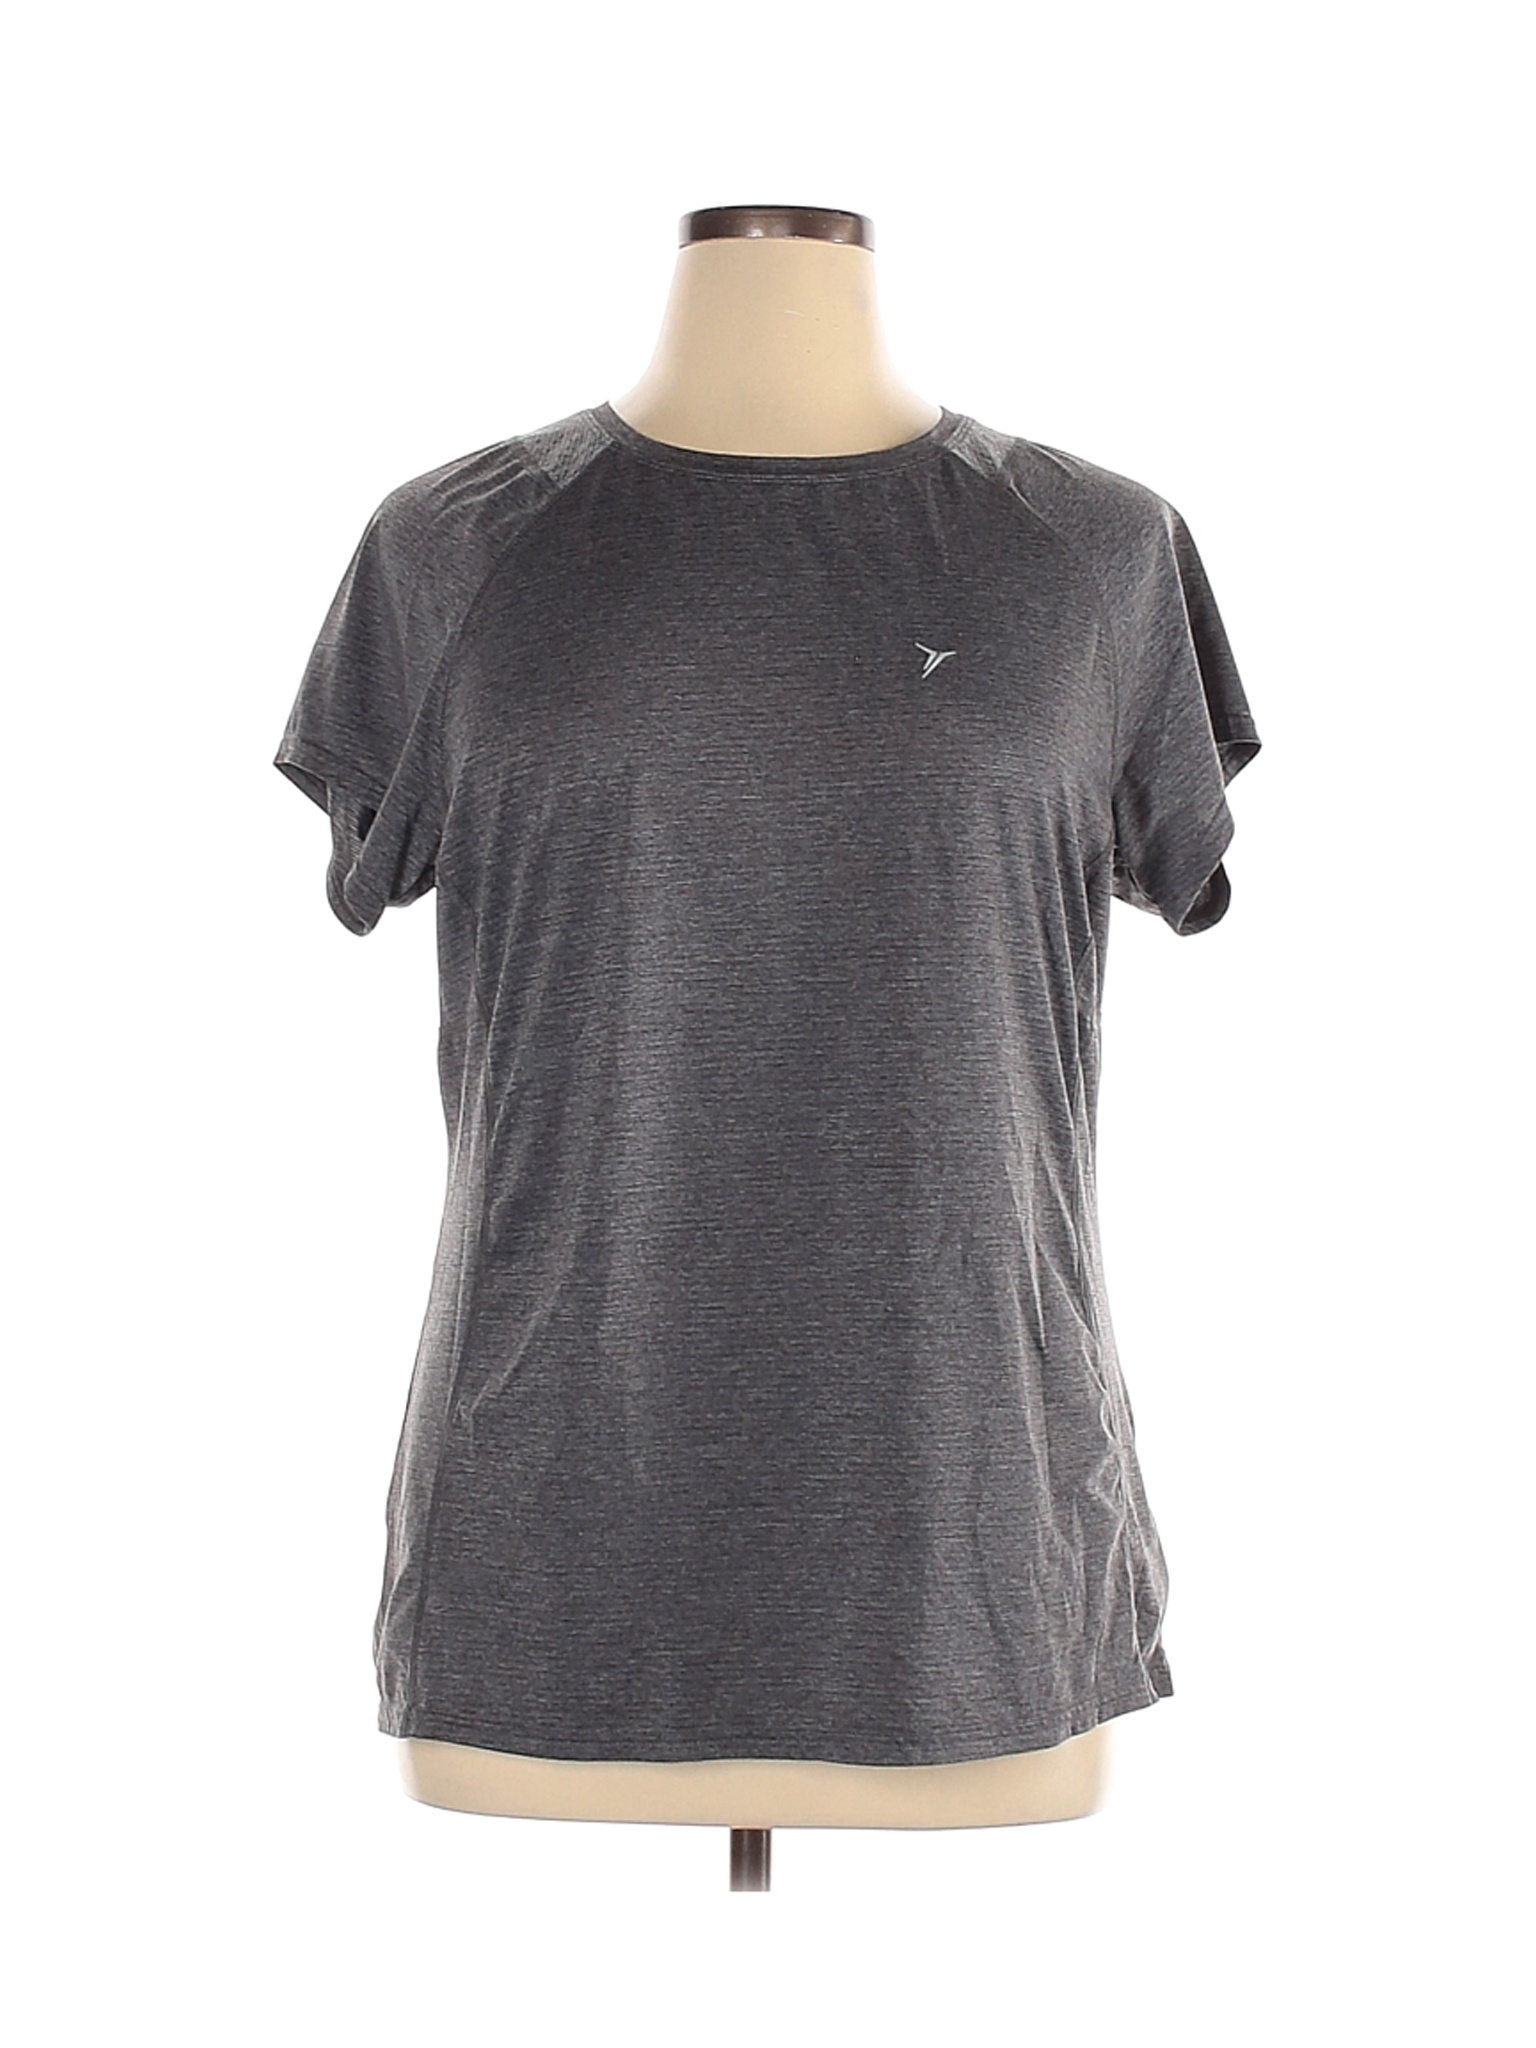 Active by Old Navy Women Gray Active T-Shirt XL | eBay